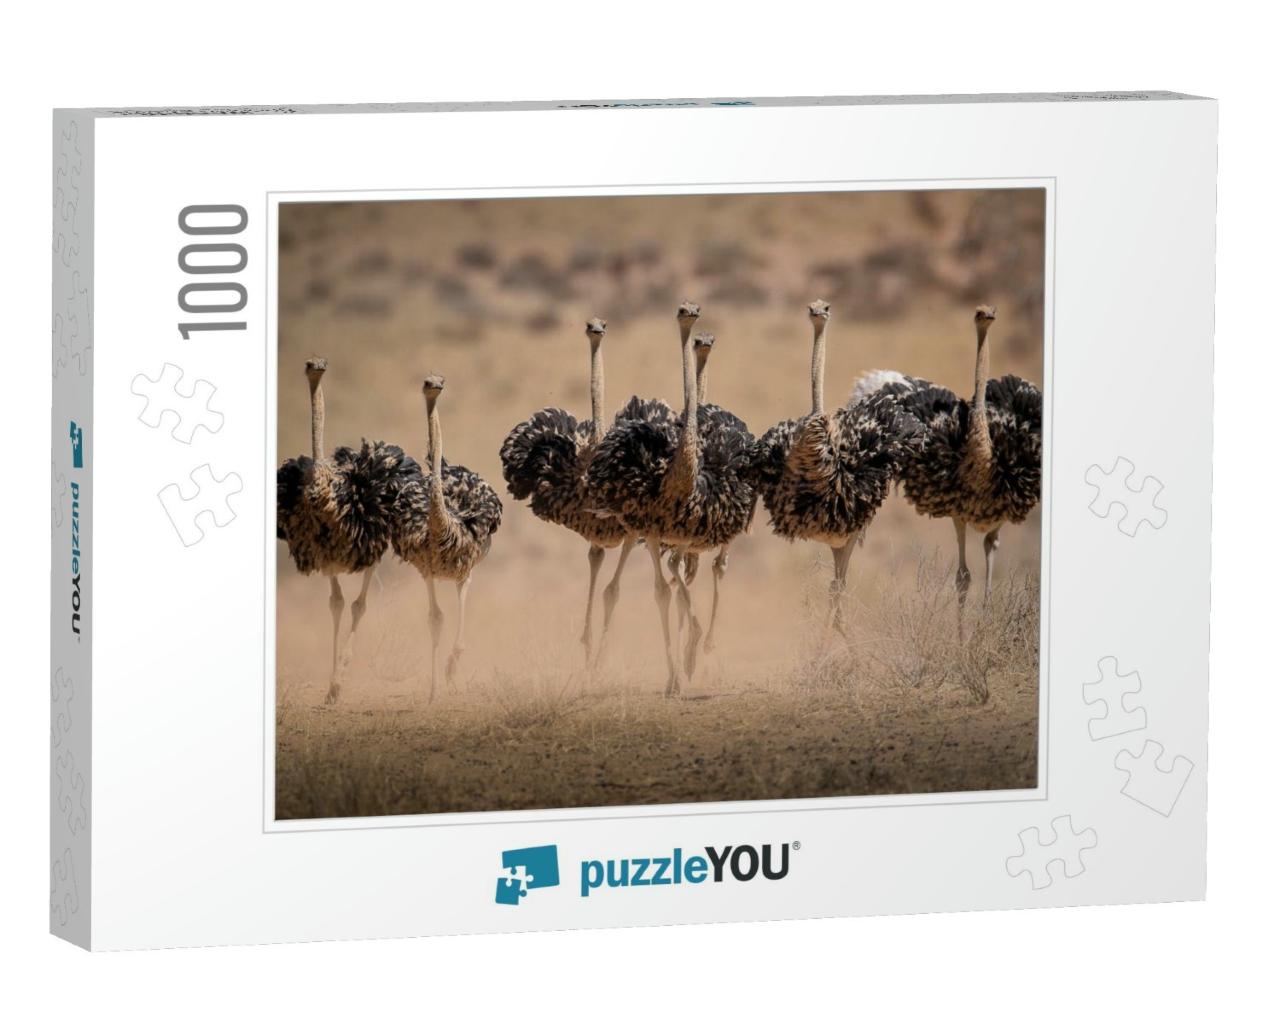 Ostrich Hens Are Kicking Up Dust as They Try to Escape th... Jigsaw Puzzle with 1000 pieces